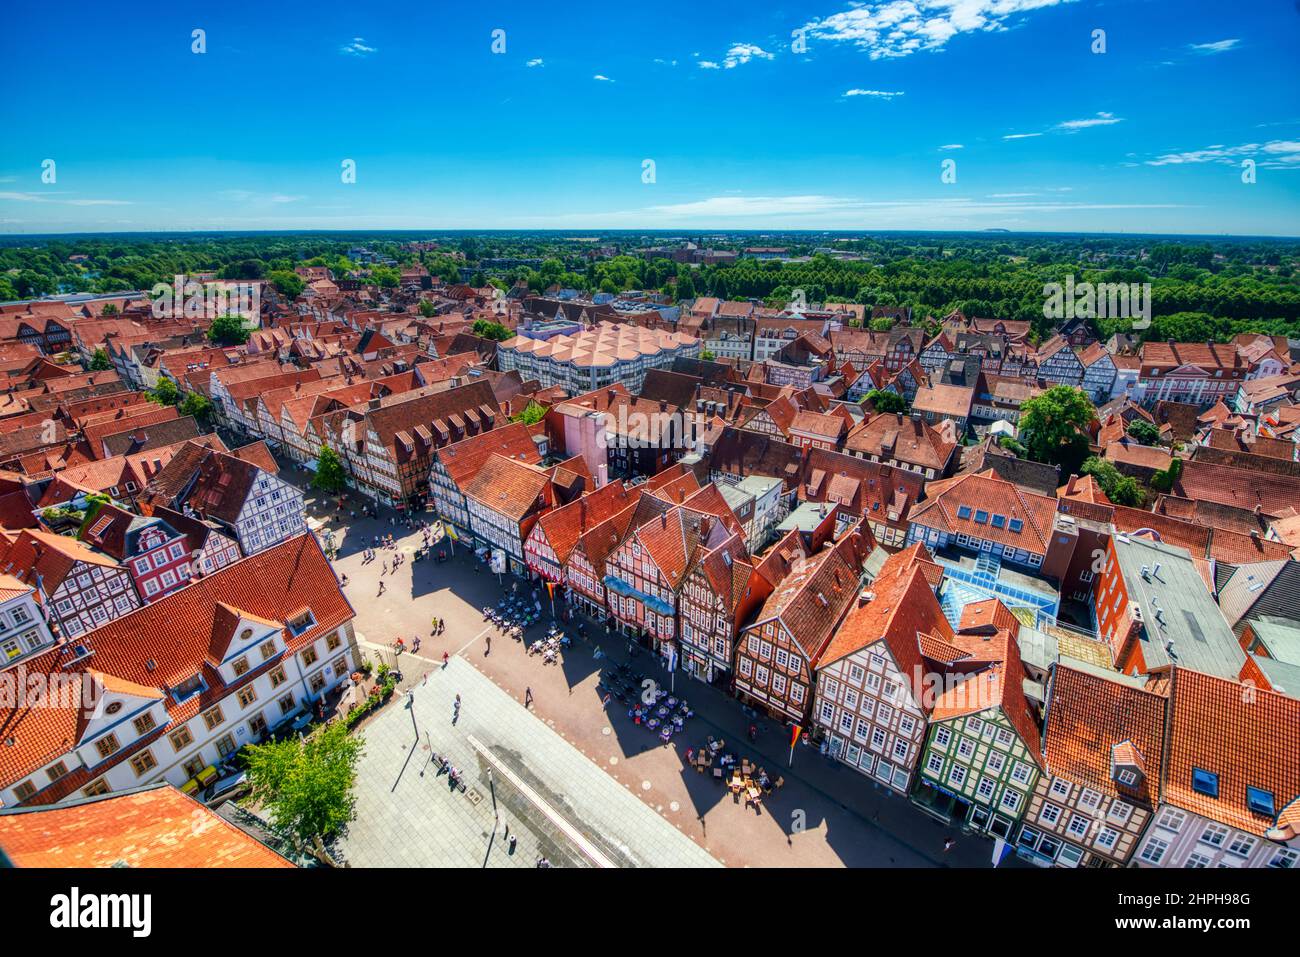 Celle, Germany - July 18, 2016: Aerial view of medieval city streets on a summer day Stock Photo